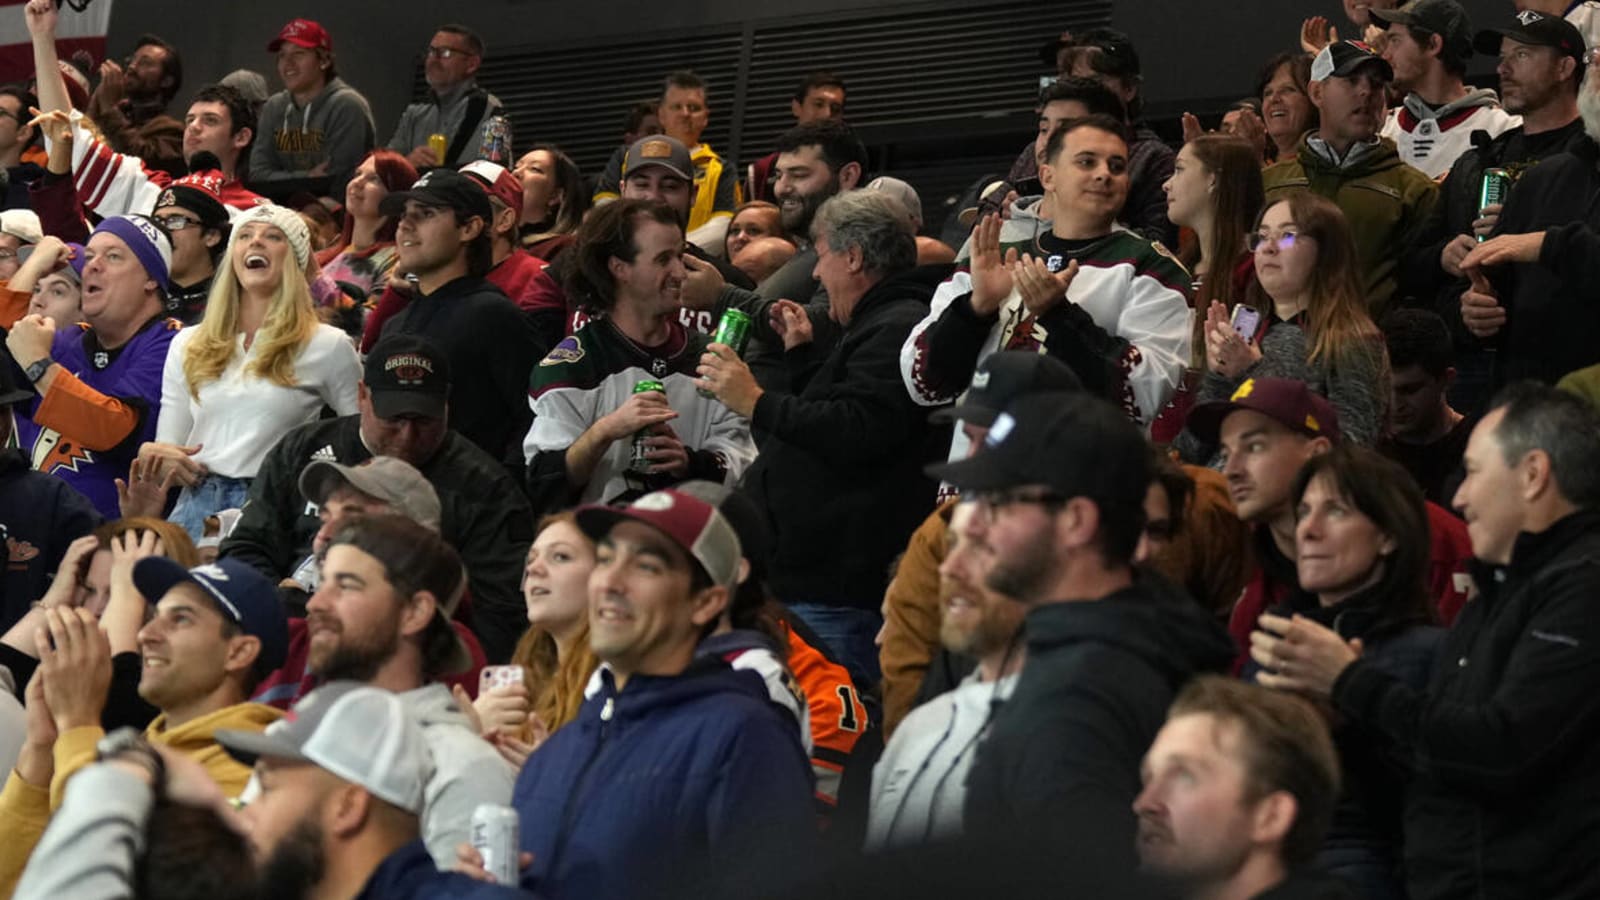 Last game at Mullett Arena: most tickets over $1,000